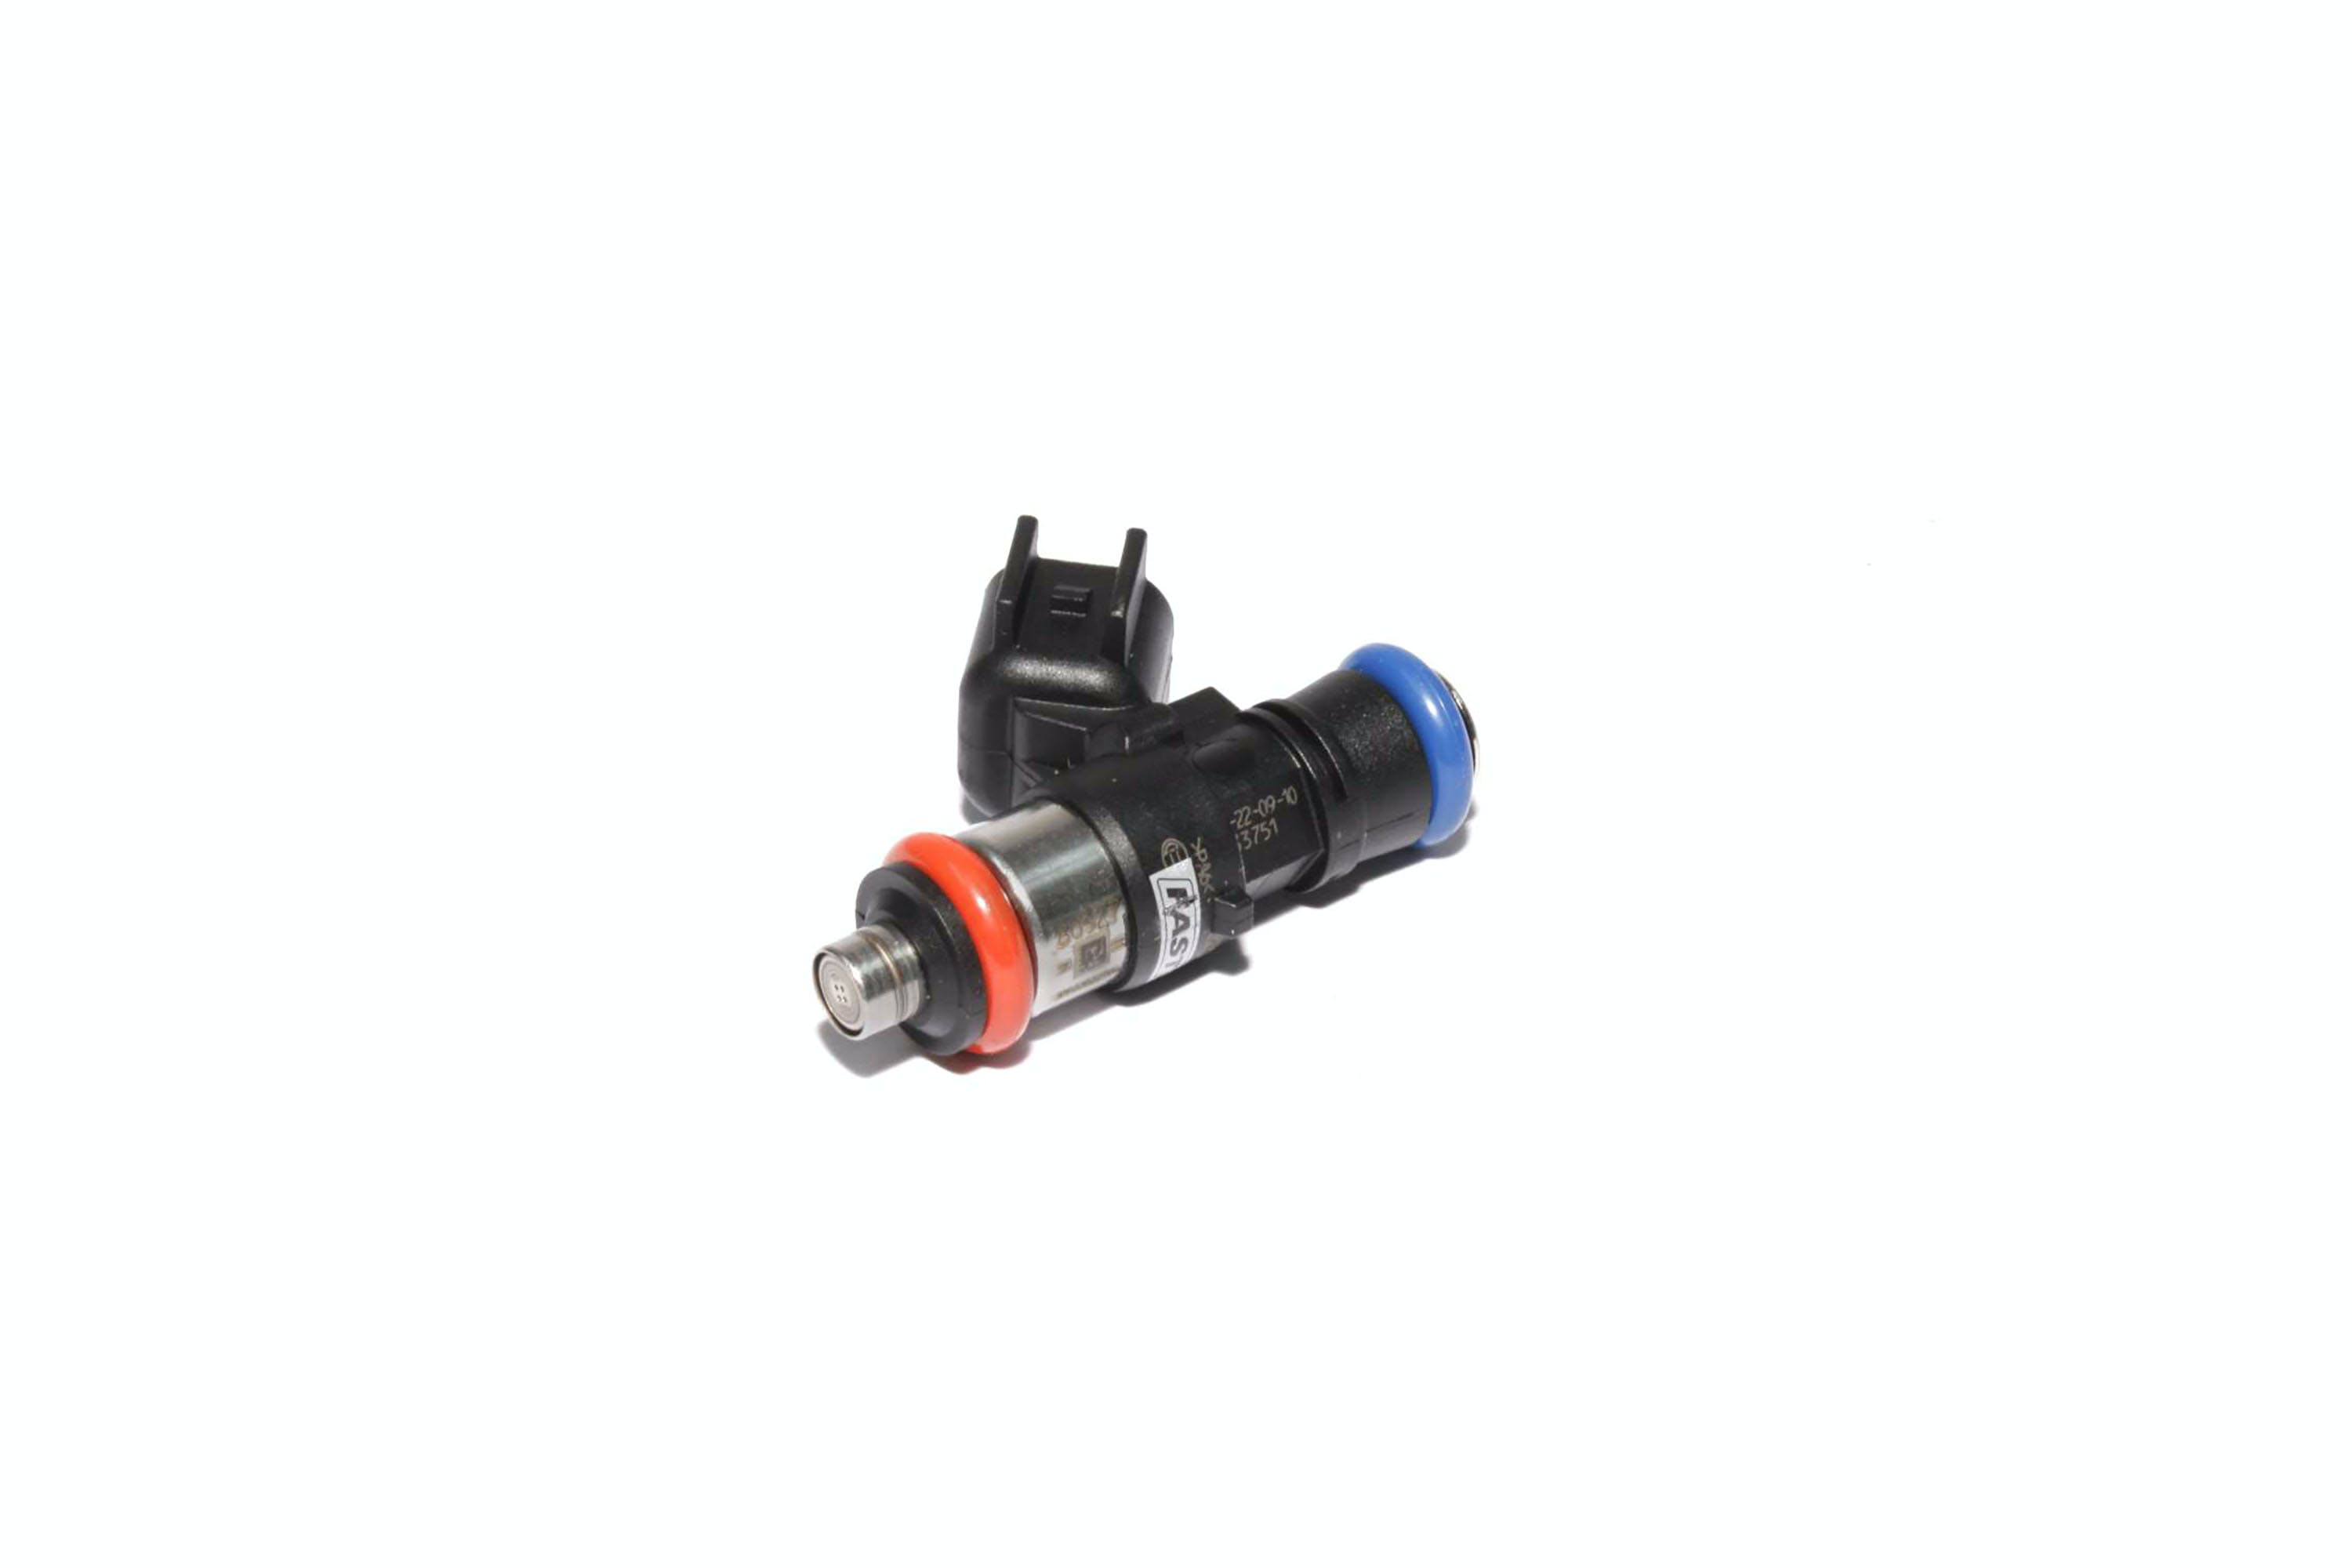 FAST - Fuel Air Spark Technology 30507-1 LS3/LS7 Type 39 Lb/Hr High Impedance Injector